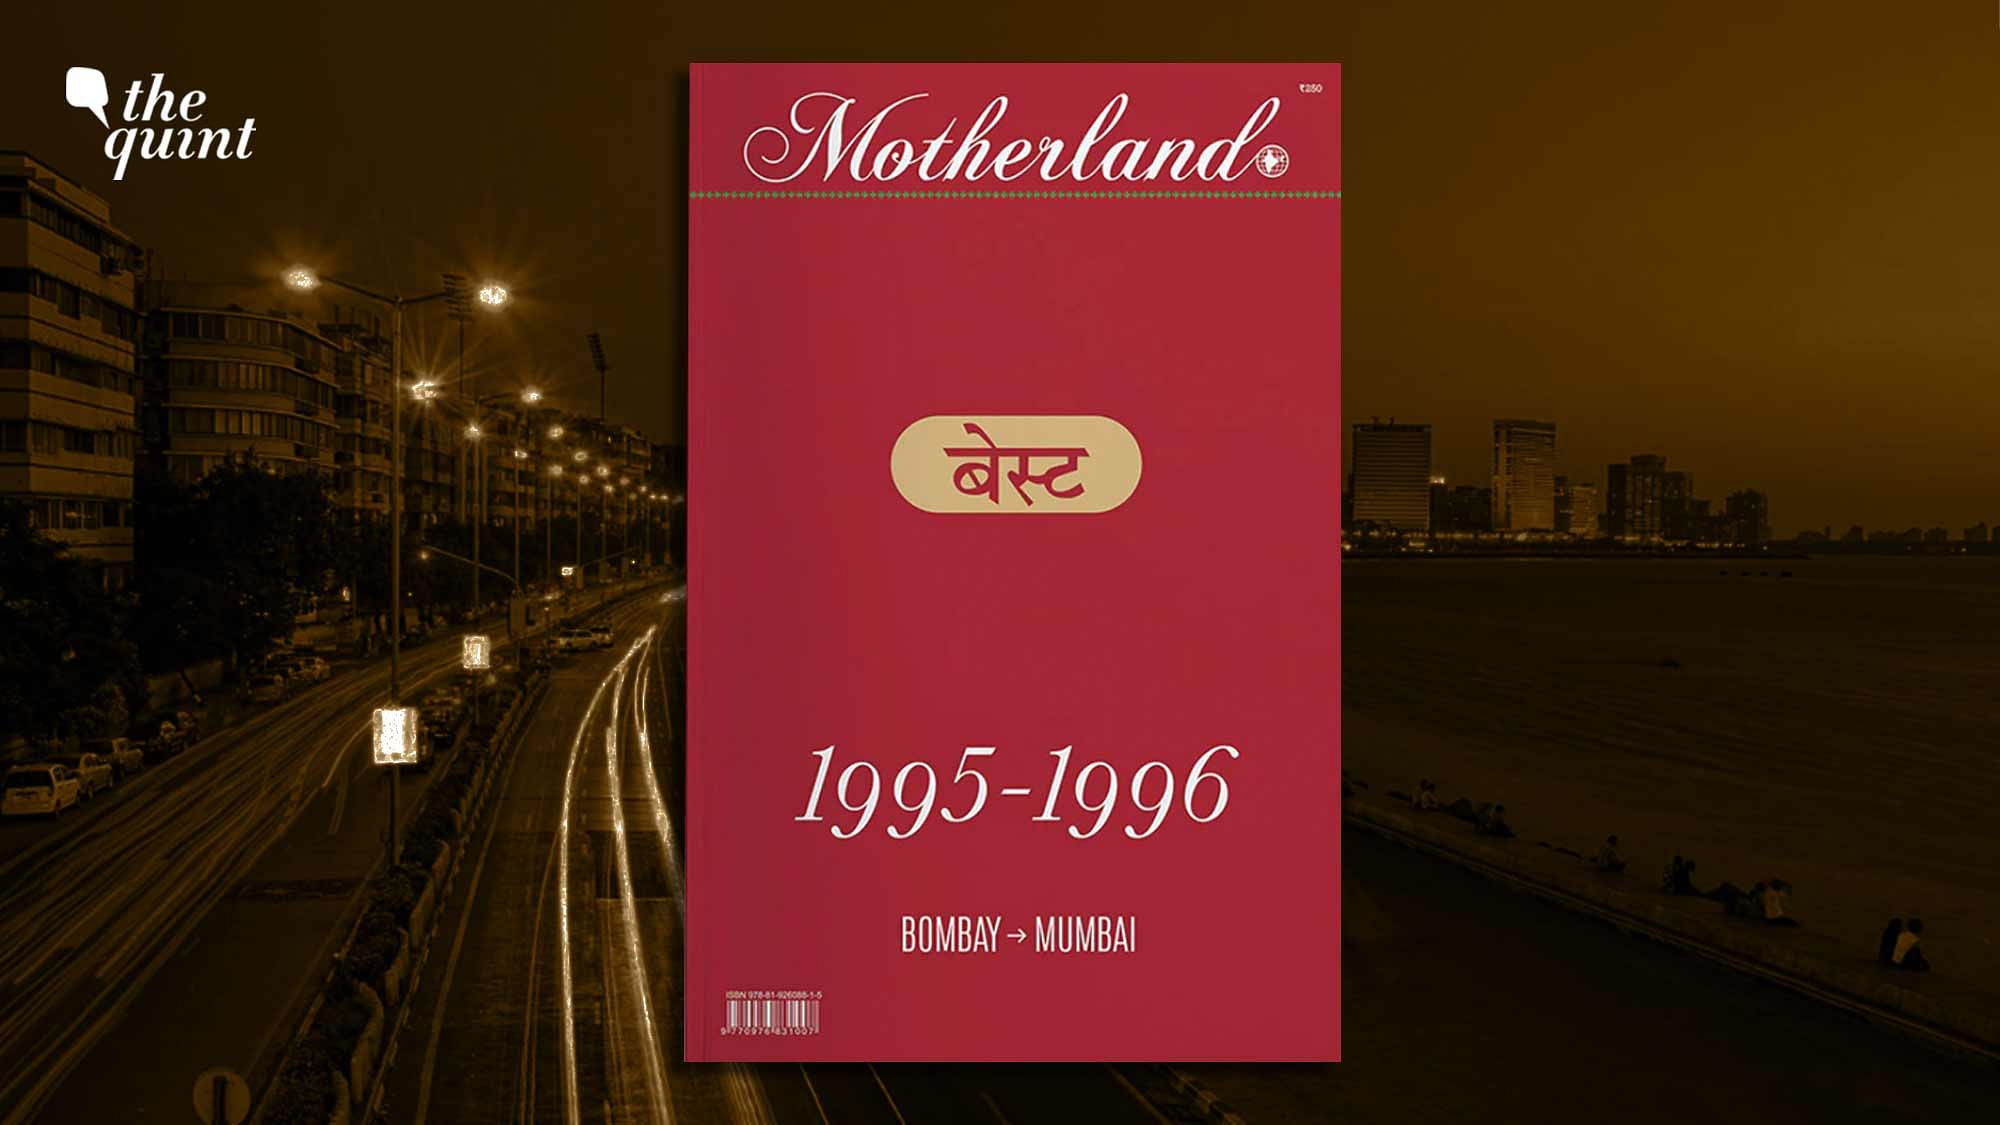 <div class="paragraphs"><p><em>Motherland </em>is a journal of experience, with each issue revolving around a different theme. Its latest issue <em><ins><a href="https://motherlandsuperstore.com/collections/magazines/products/bombay-1995-mumbai-1996" rel="noreferrer noopener">Bombay (1995) - Mumbai (1996)</a></ins> </em>pieces together sharp, poignant pieces that transport you to another, crucial time.</p></div>